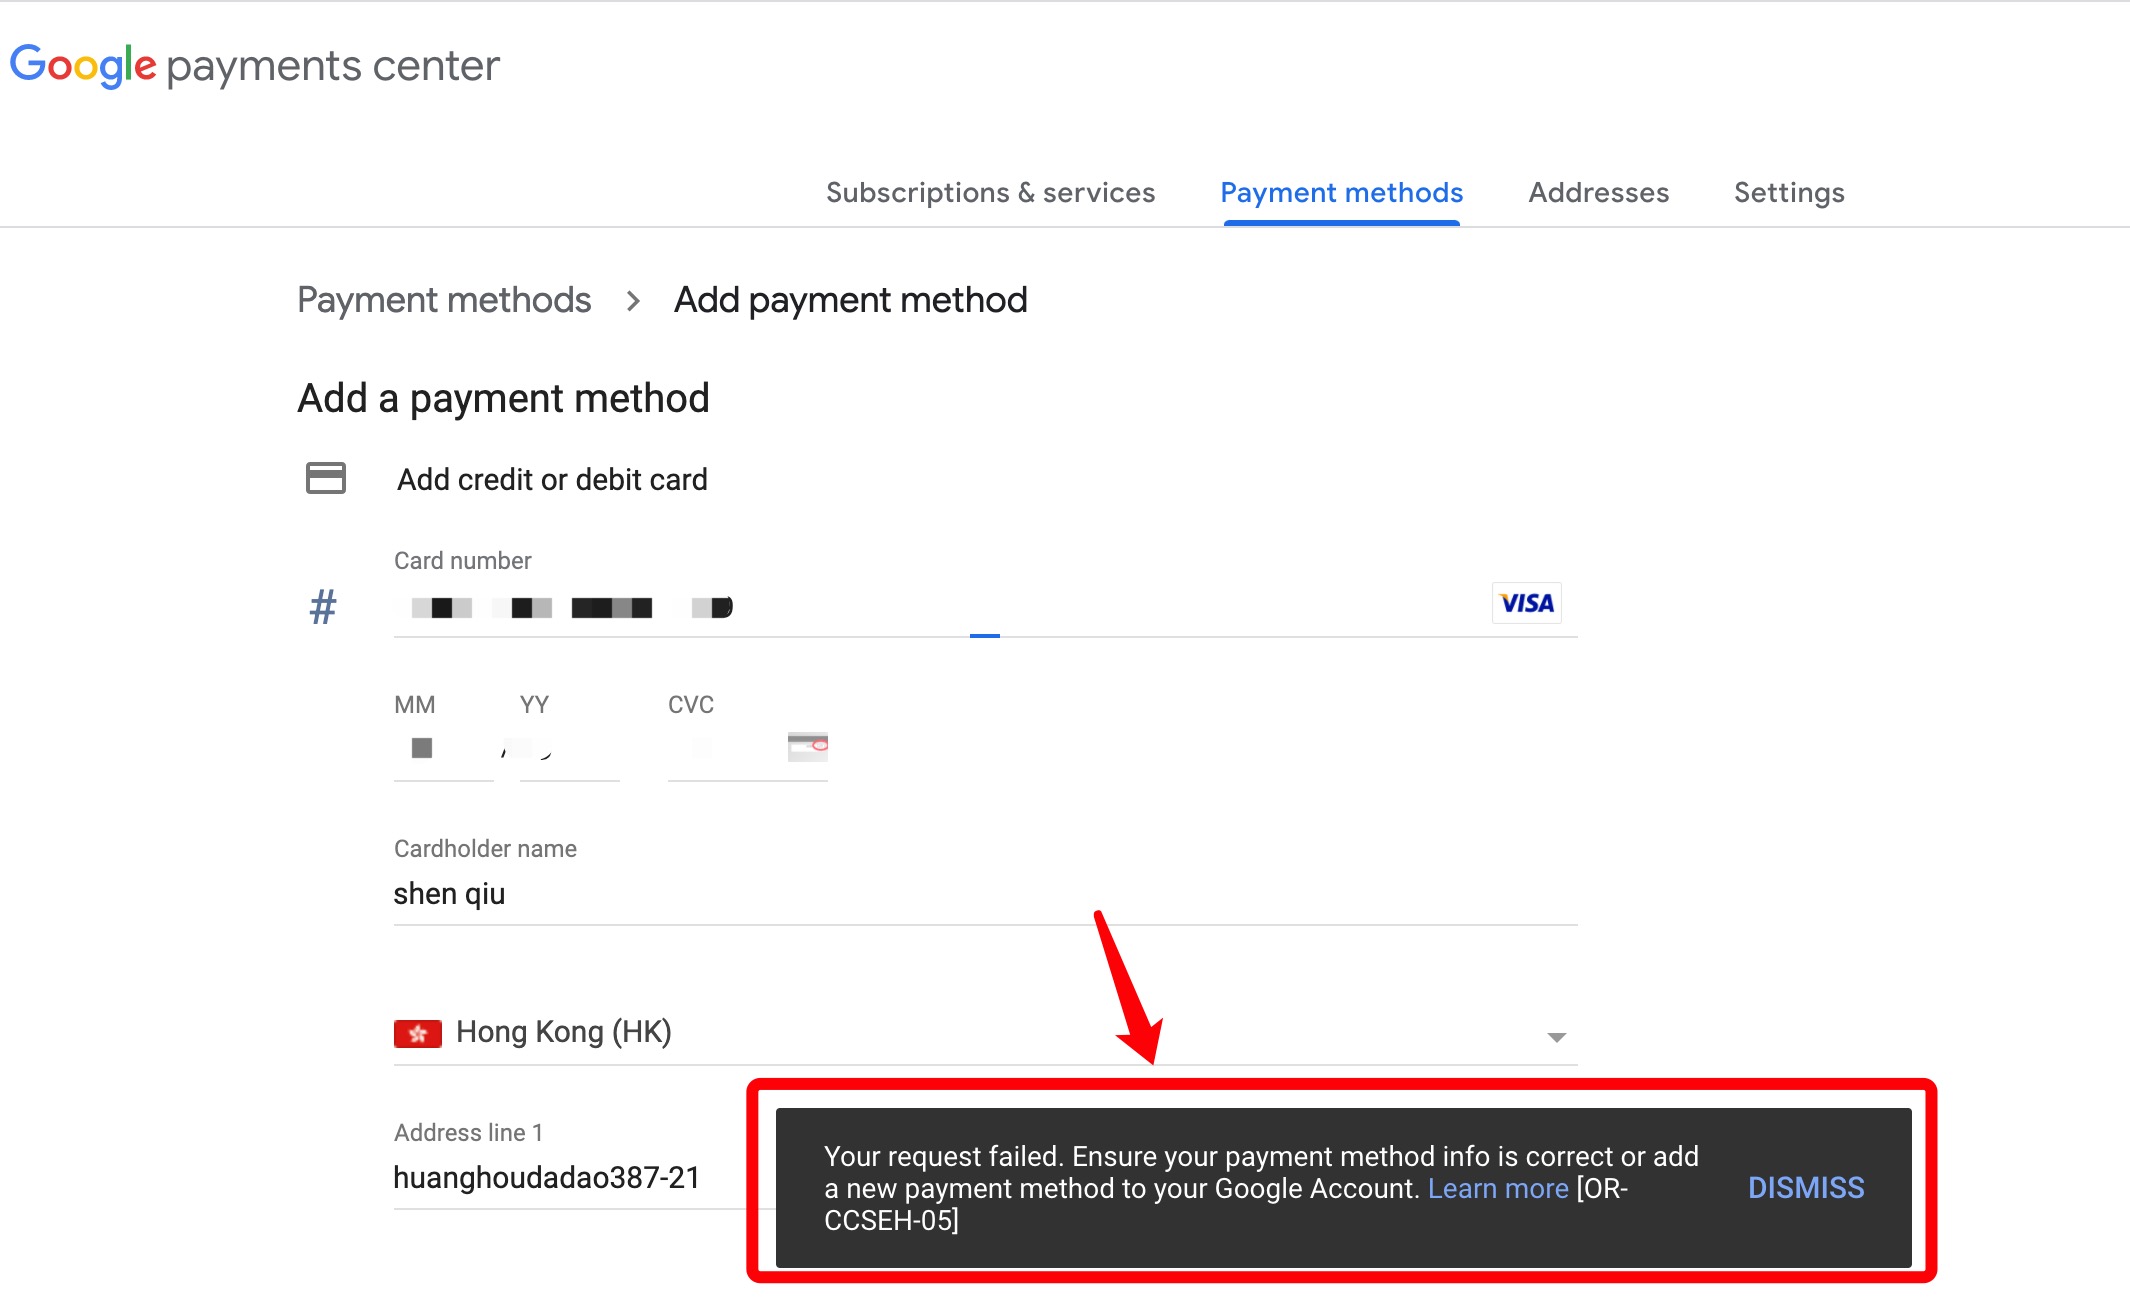 Your request failed. Ensure your payment method info is correct or add a new payment method to your Google Account. Learn more [OR-CCSEH-05]